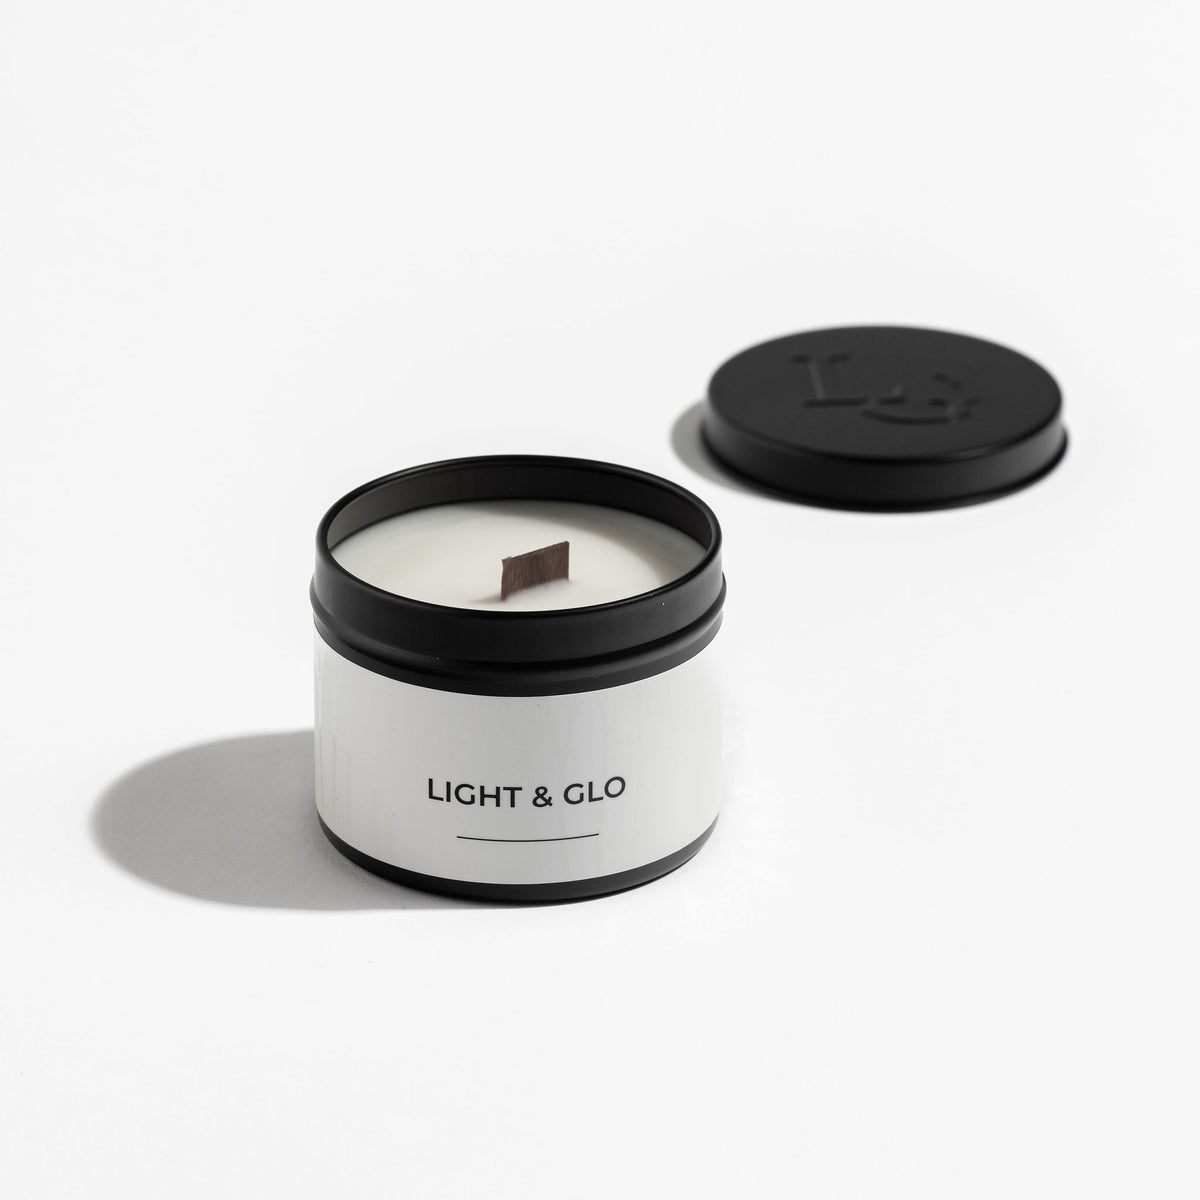 Coconut &amp; Lime - Monochrome Travel Candle | Luxury Candles &amp; Home Fragrances by Light + Glo